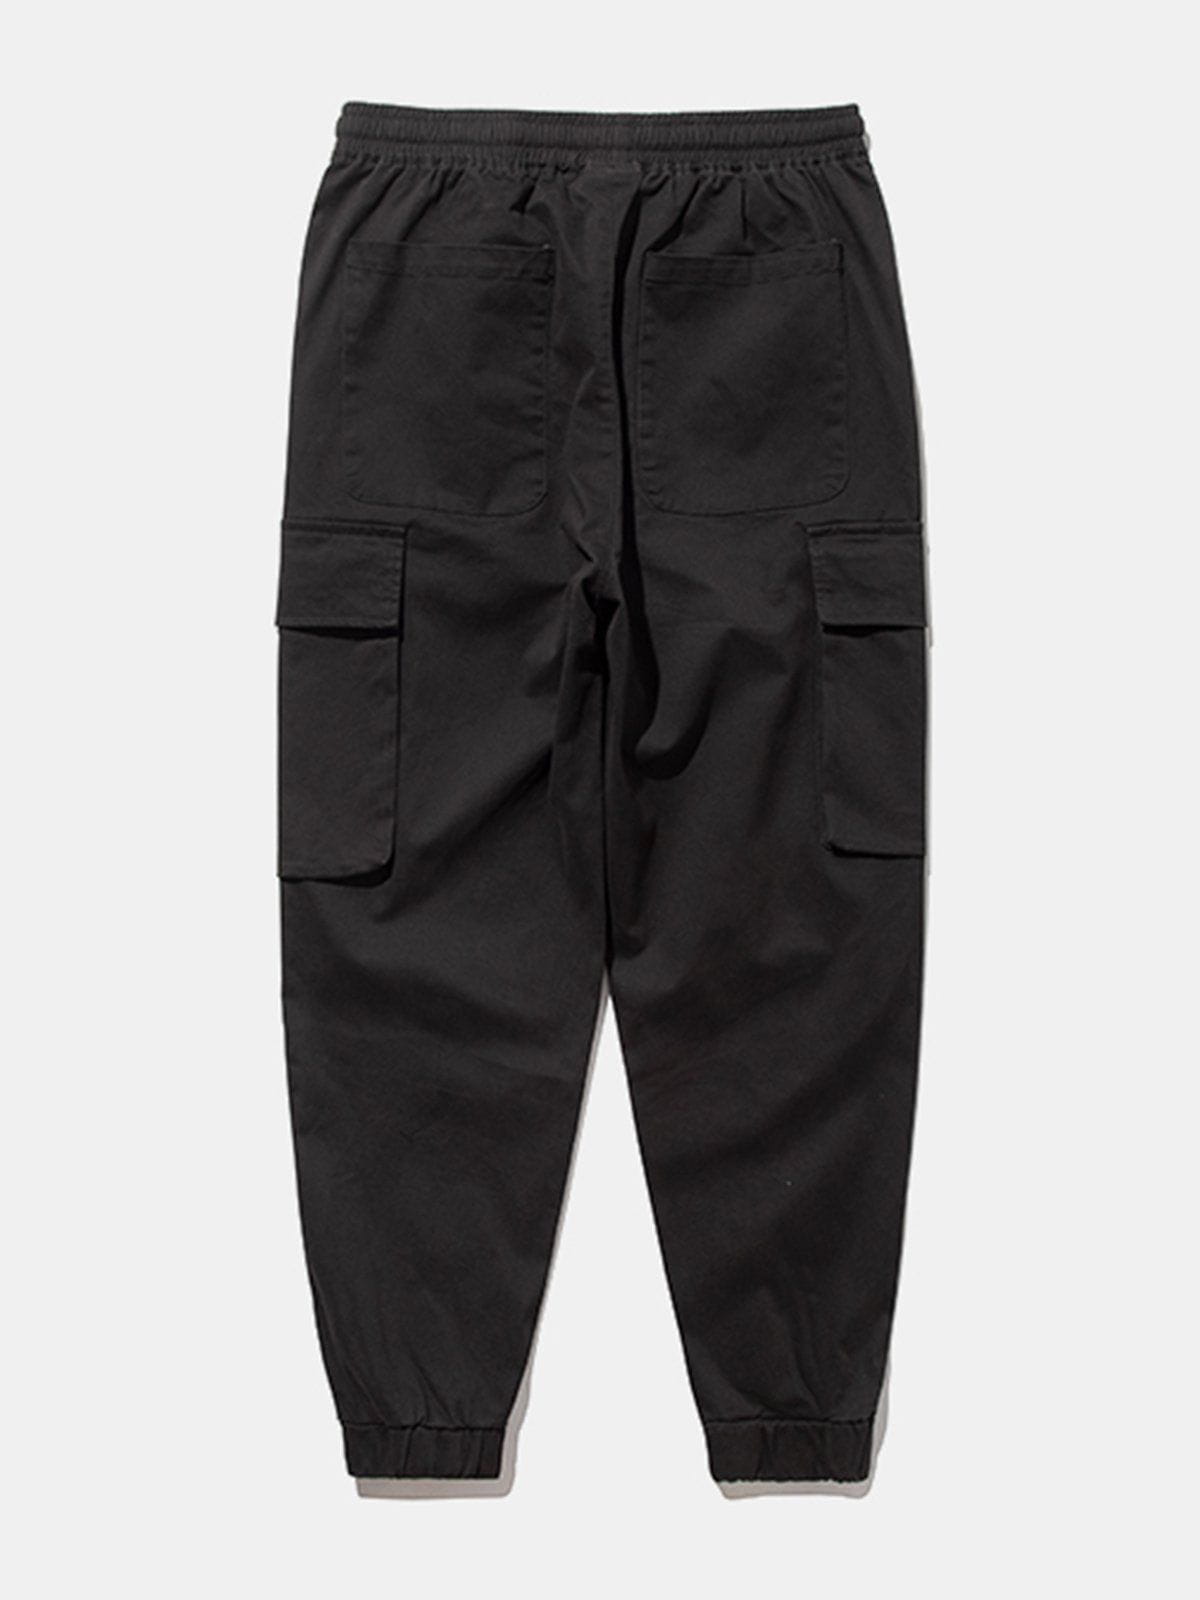 Sneakerland® - Solid Color Casual Cargo Pants